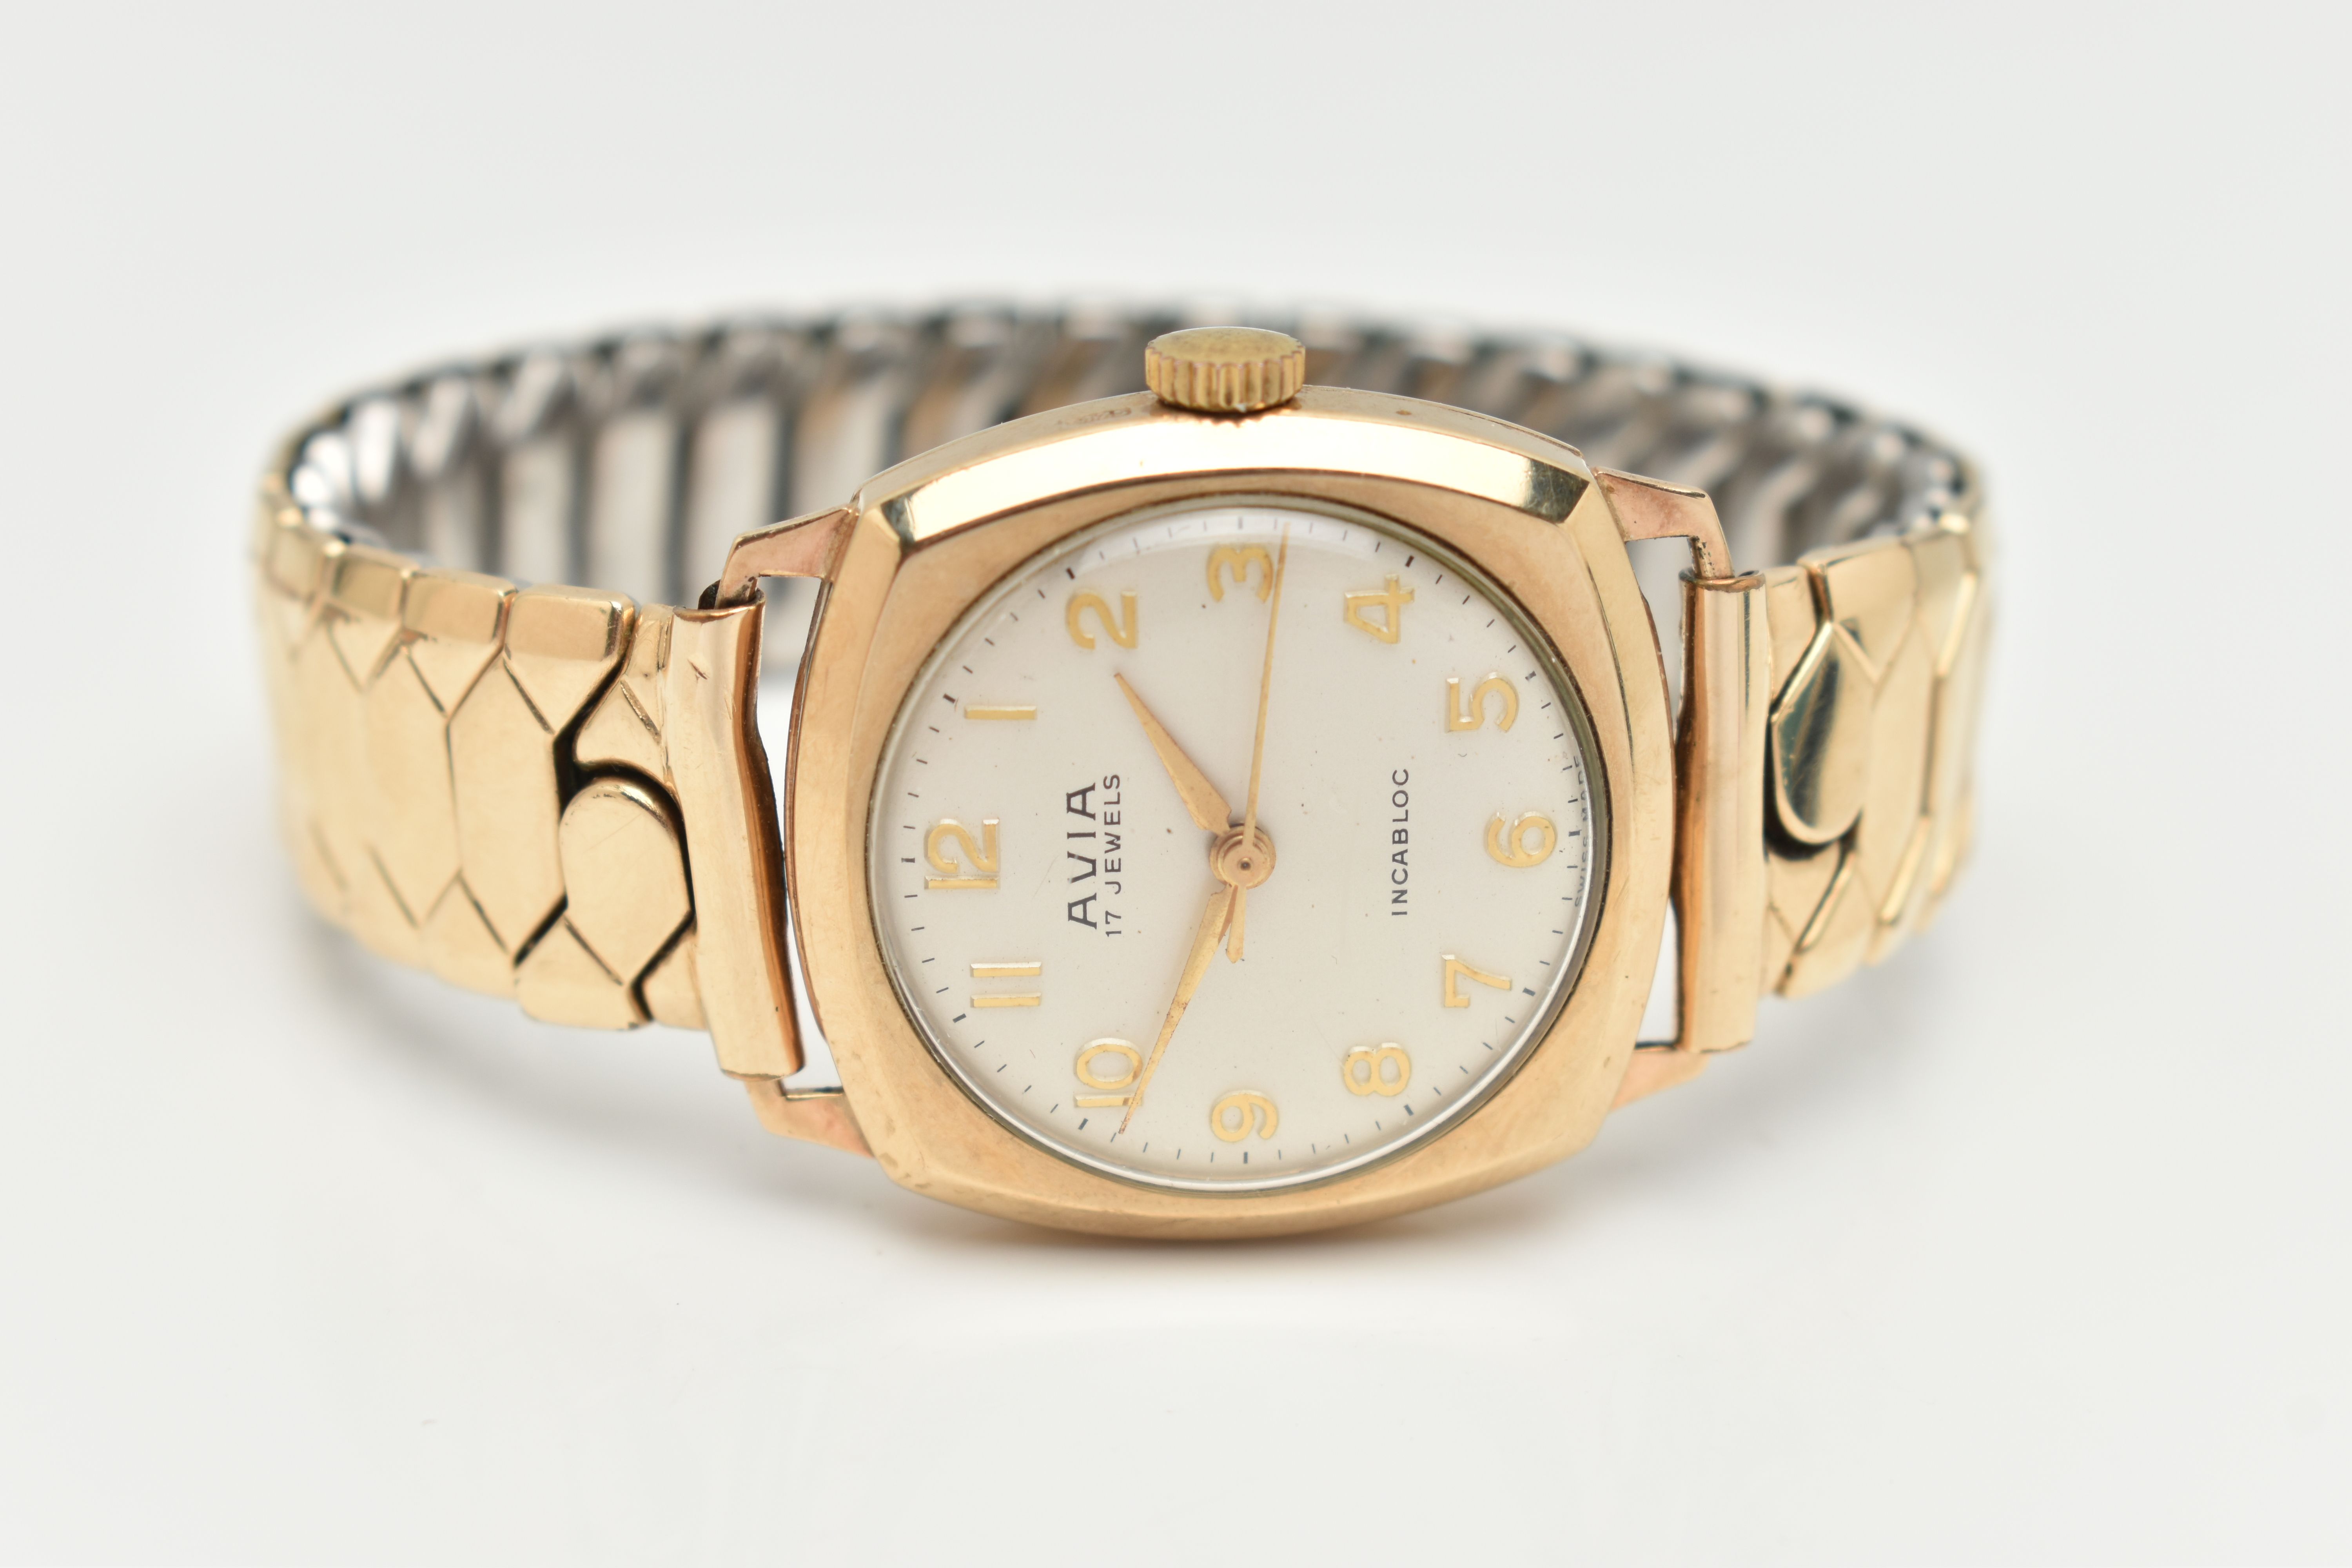 A 9CT GOLD 'AVIA' WRISTWATCH, manual wind, round silver dial signed 'Avia 17 Jewels, Incabloc', - Image 4 of 6